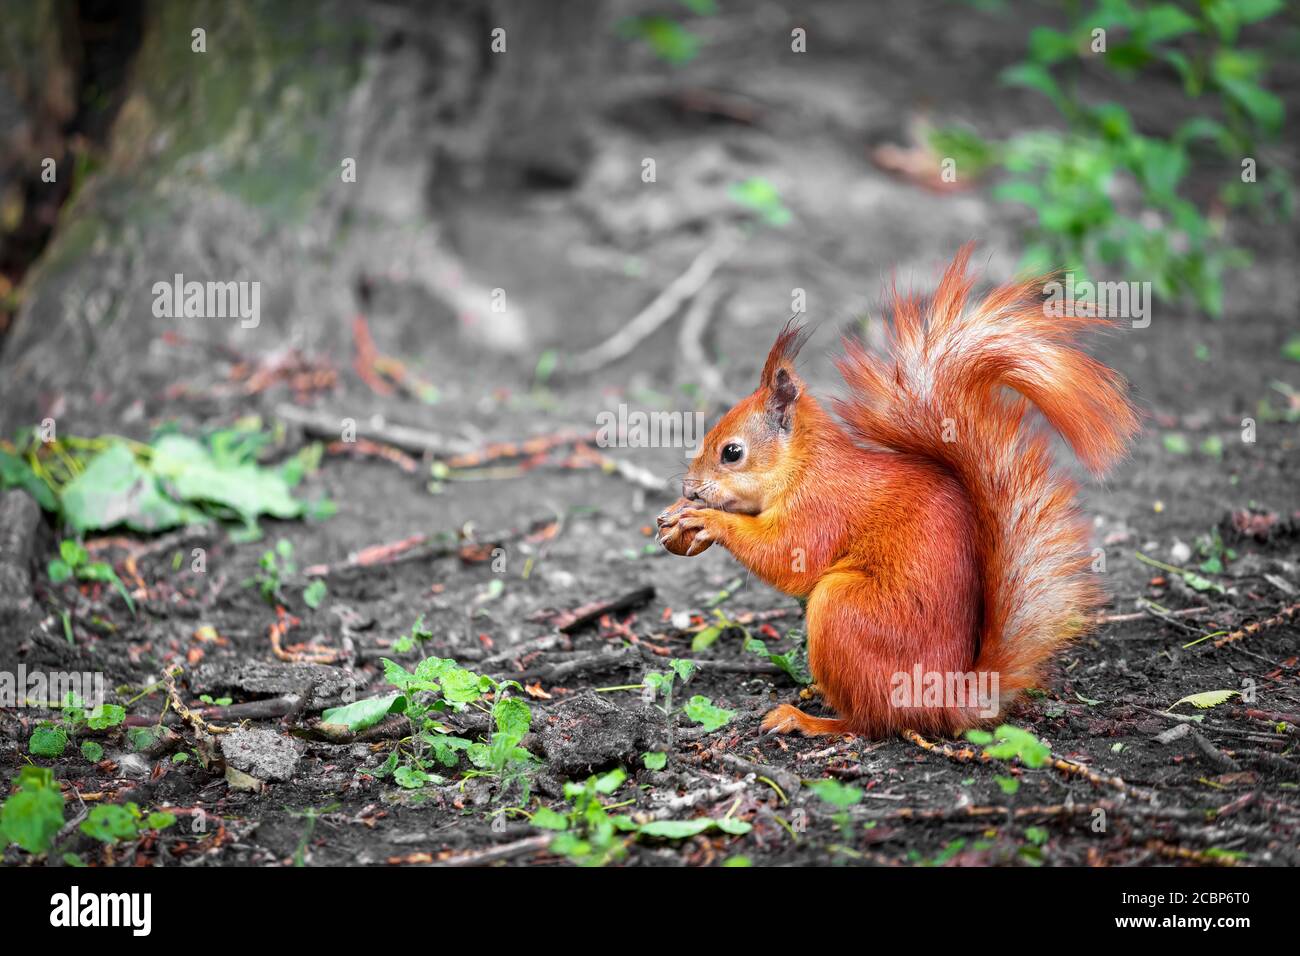 Cute red wild squirrel eating a walnut in the park. Close-up view Stock Photo